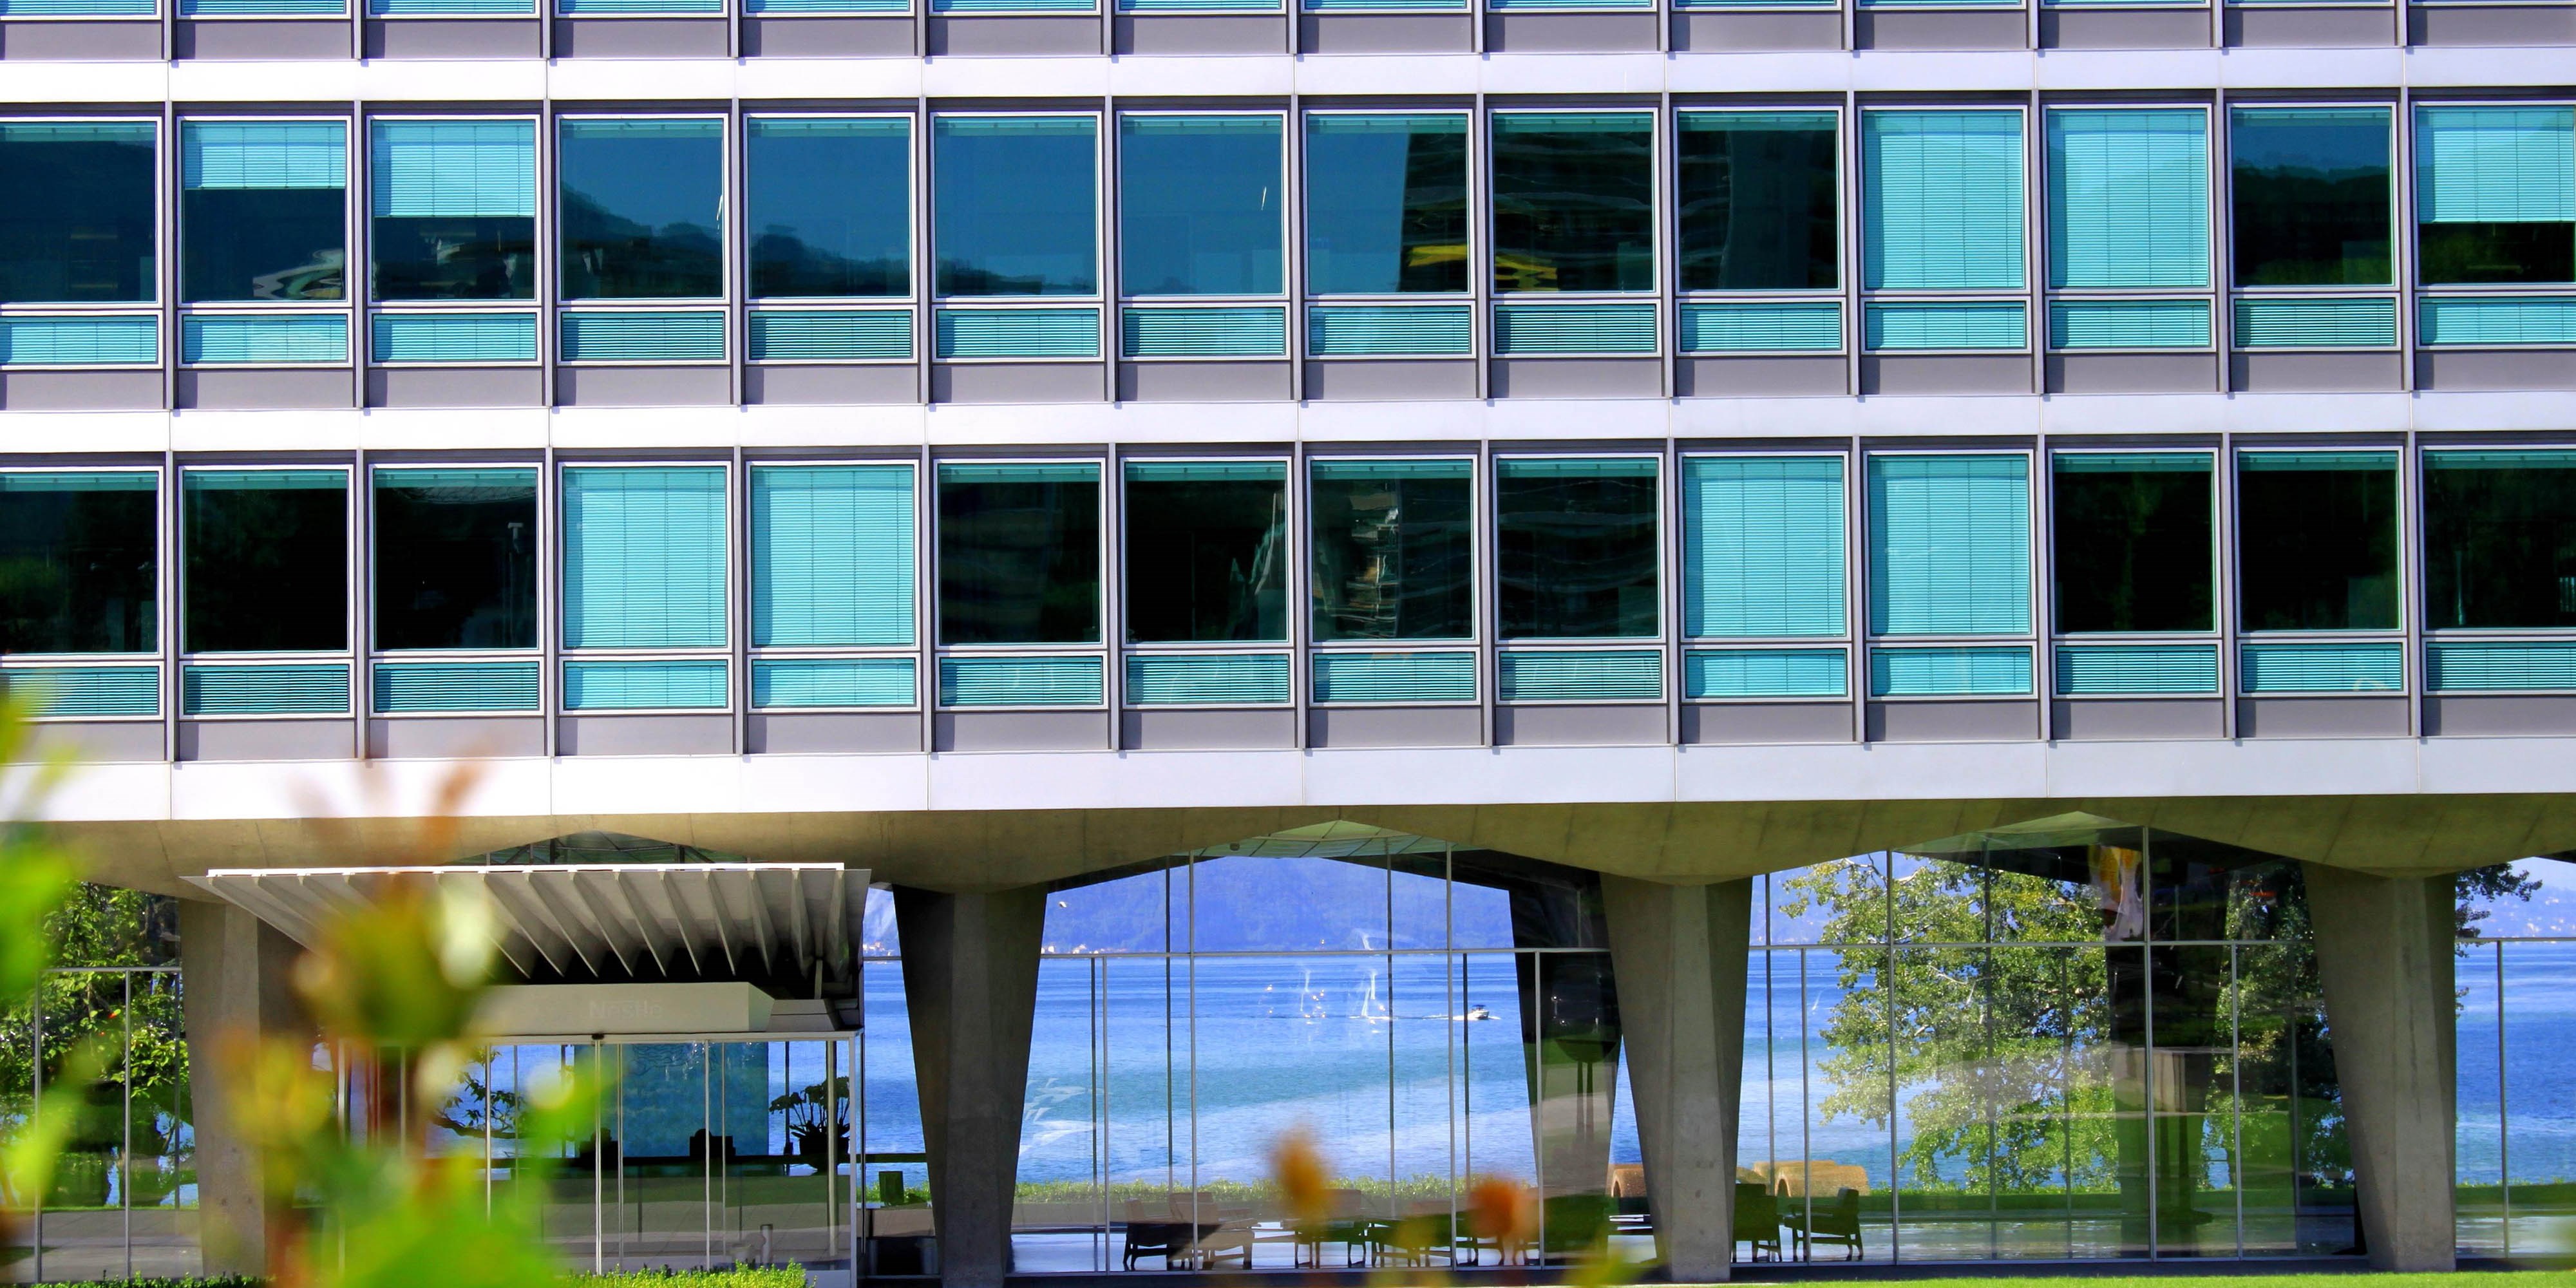 Nestlé HQ Vevey, Switzerland. Photo: Wikimedia Commons/Odrade123 [CC BY-SA 3.0 (https://creativecommons.org/licenses/by-sa/3.0)]